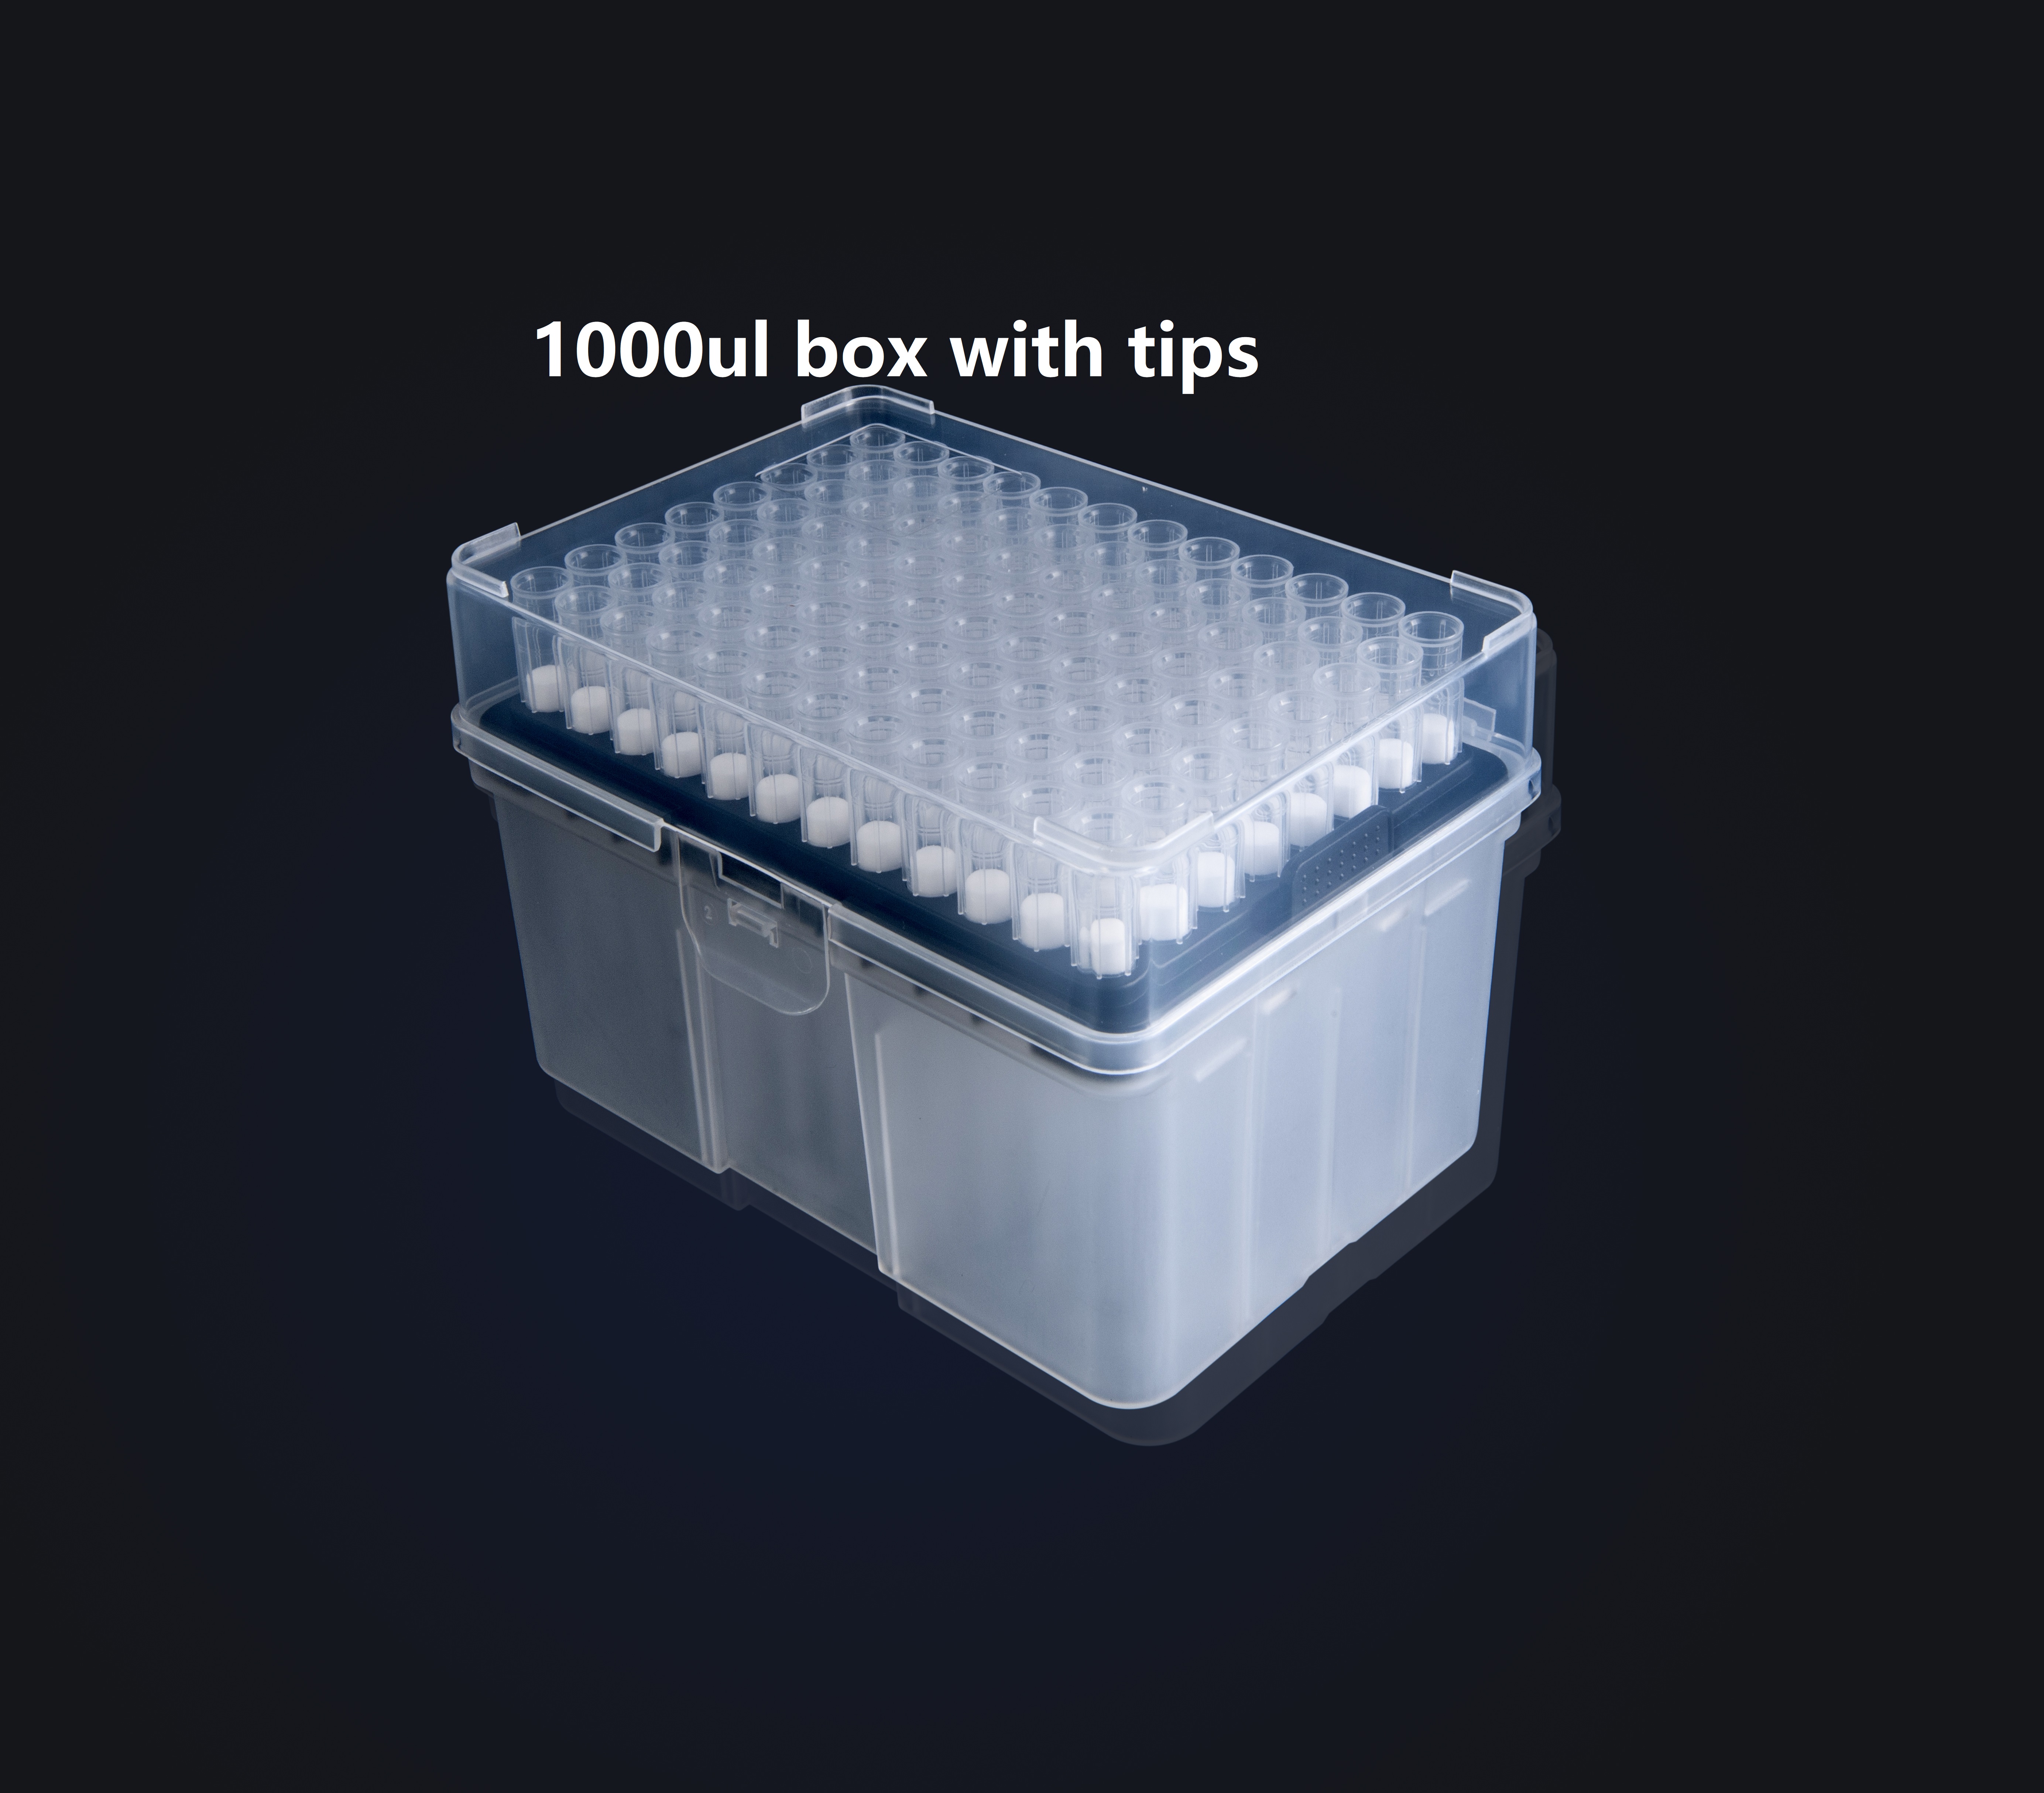 100ul tips with filter rack packing 